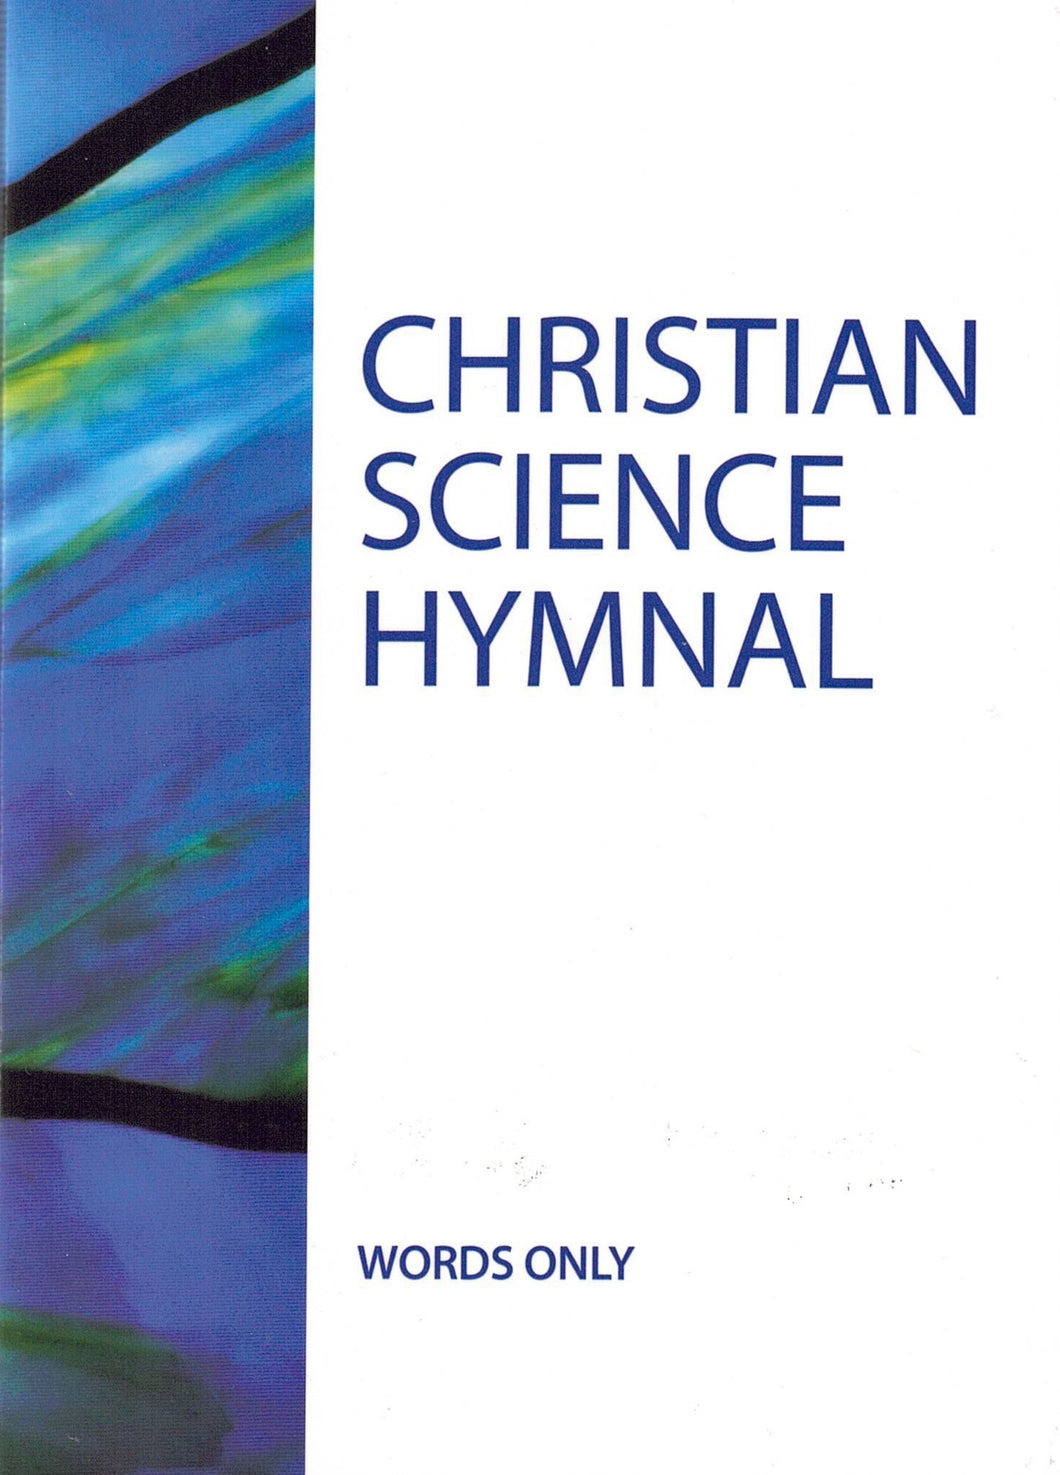 Words Only - Christian Science Hymnal (Hymns 1-429)